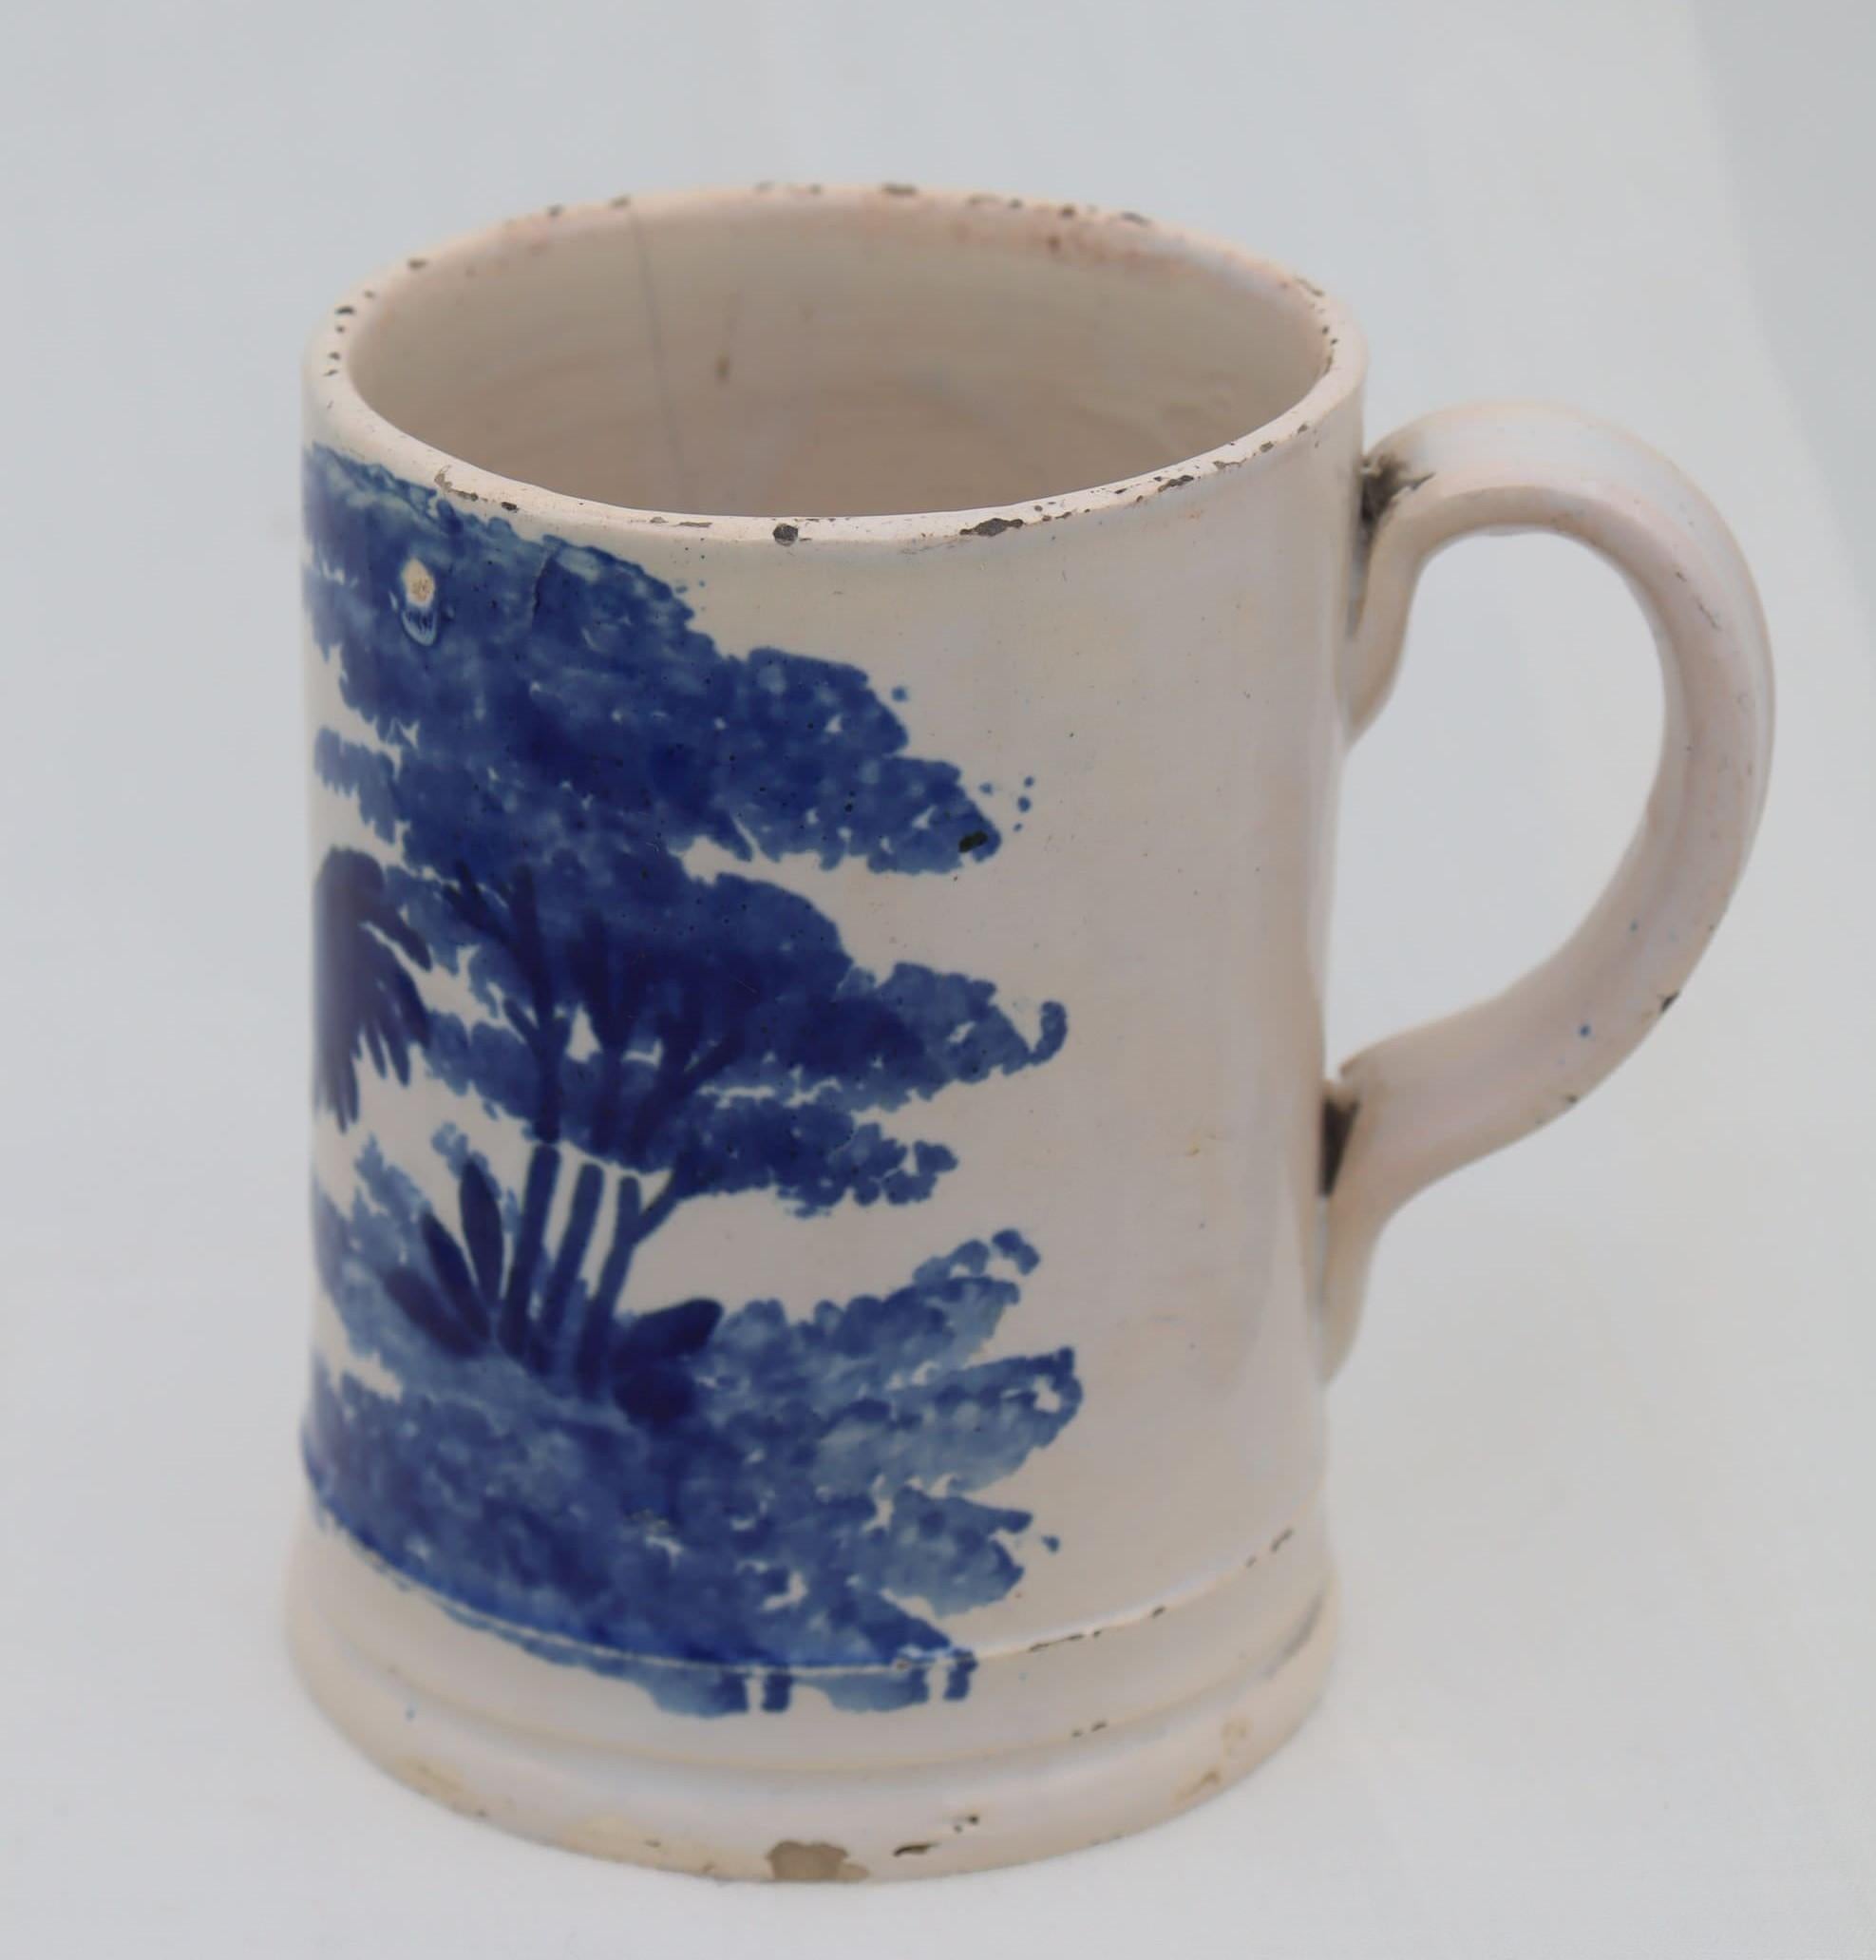 This wheel thrown mug with a lovely strap handle is decorated with a rather sophisticated blue spongeware design of a rooster under a tree. It stands 115 mm (4.5 inches) high and has a diameter at the base of 90 mm (3.75 inches). There are a number